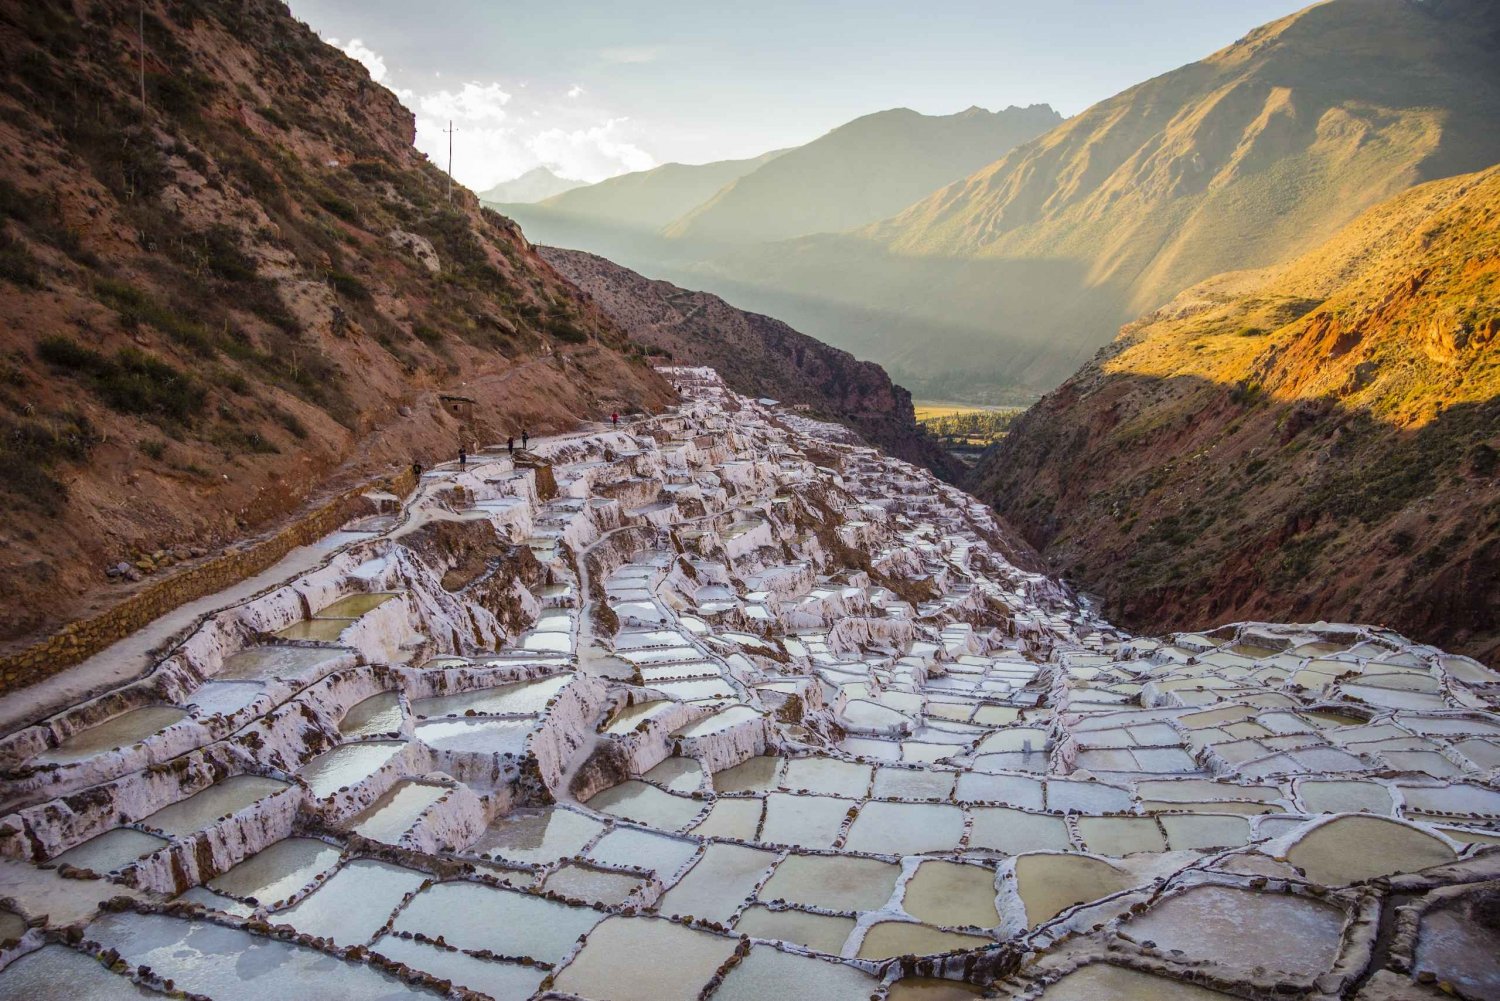 From Cusco: 2-Day ATV Tour to Sacred Valley and Machu Picchu